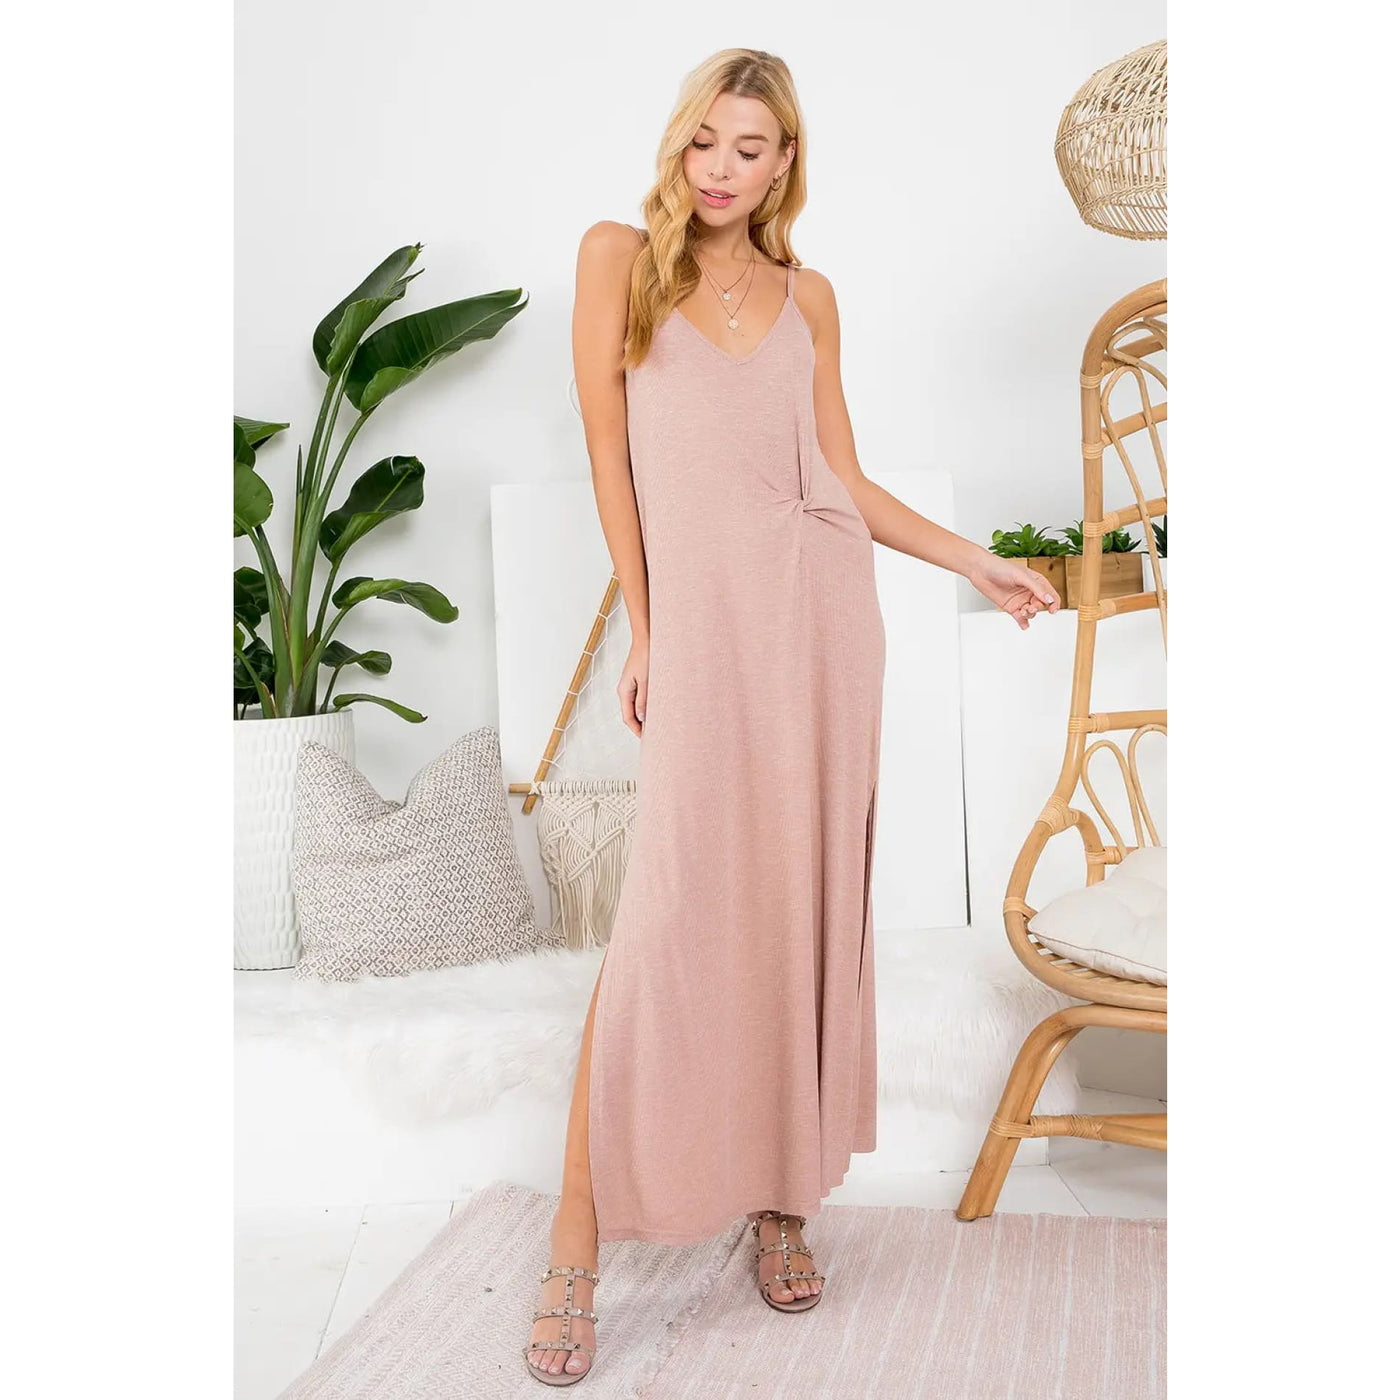 The Sweetest Reason Maxi Dress - 170 Casual Dresses/Jumpsuits/Rompers